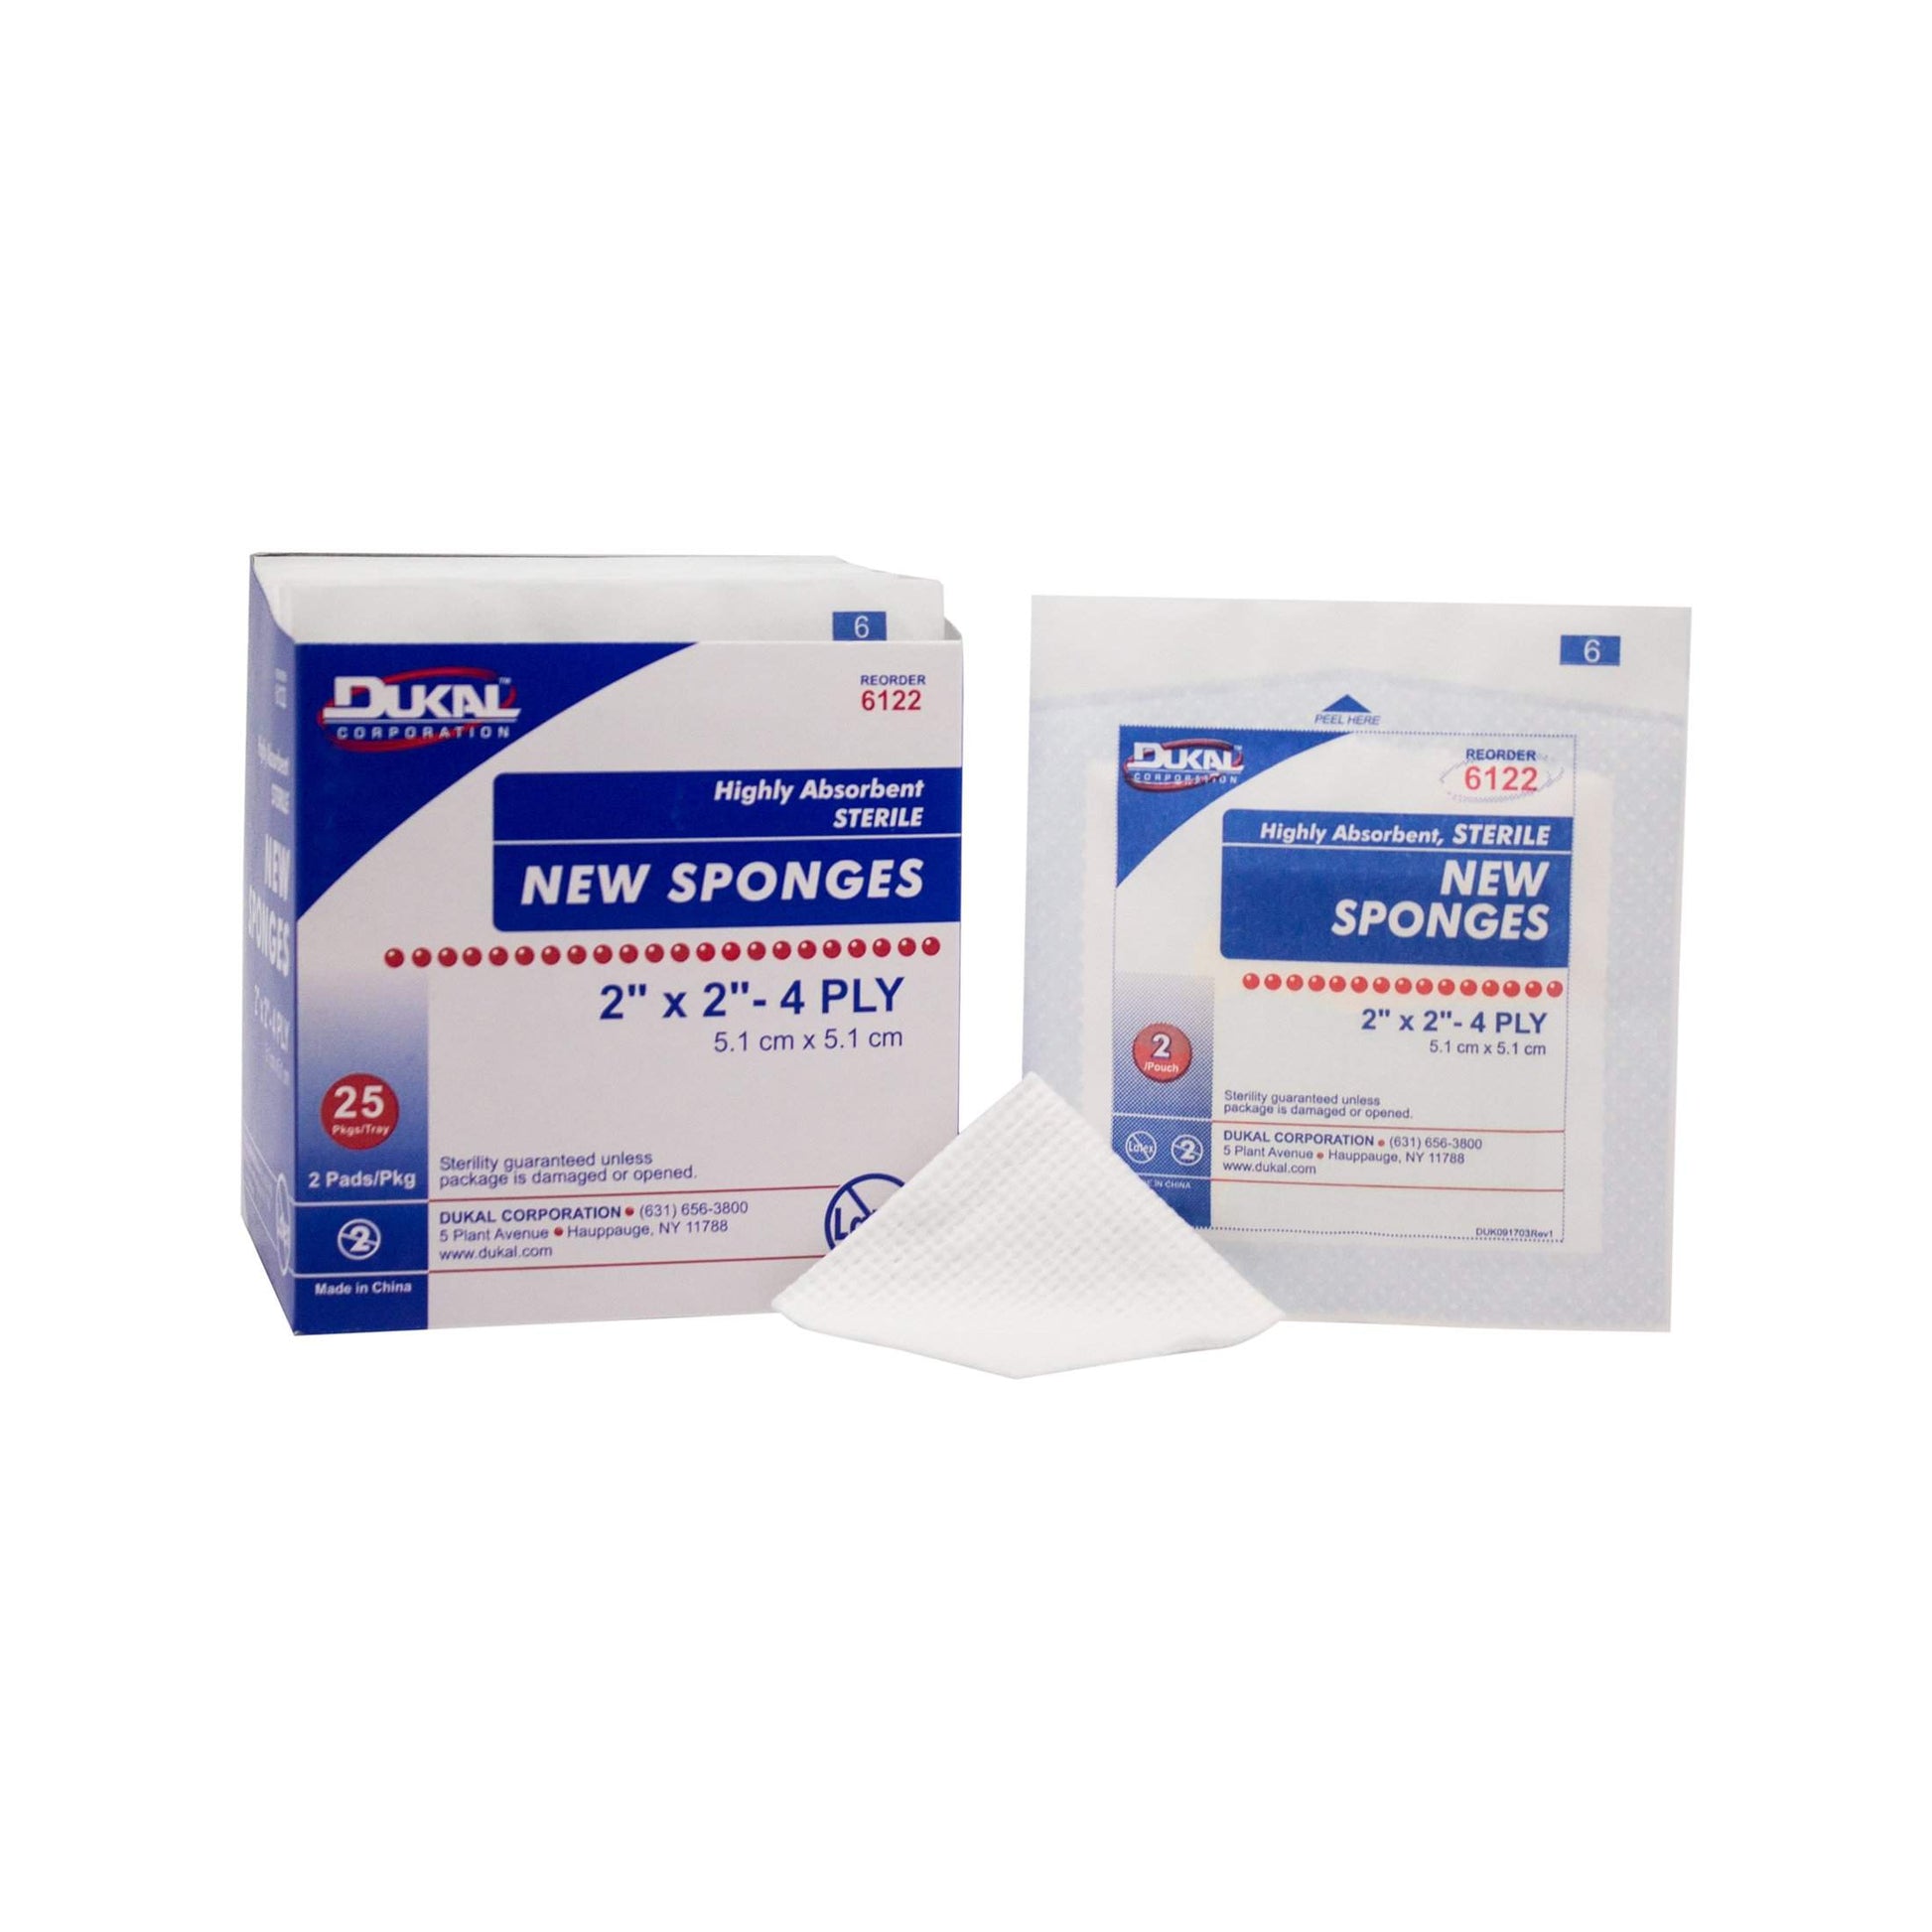 Dukal Non-Woven Sponges 2" x 2". Case of 50 (25x2) sterile dressings for Wounds. Non-linting. 4-ply Rayon/Poly Blend. Single use. Latex-Free. Individually Packaged.-Dukal-Brand_Dukal/ Dawn Mist,Collection_Lifestyle,Collection_Skincare,Dukal_Gauze,Dukal_Medical,Dukal_Spa,Life_Medical